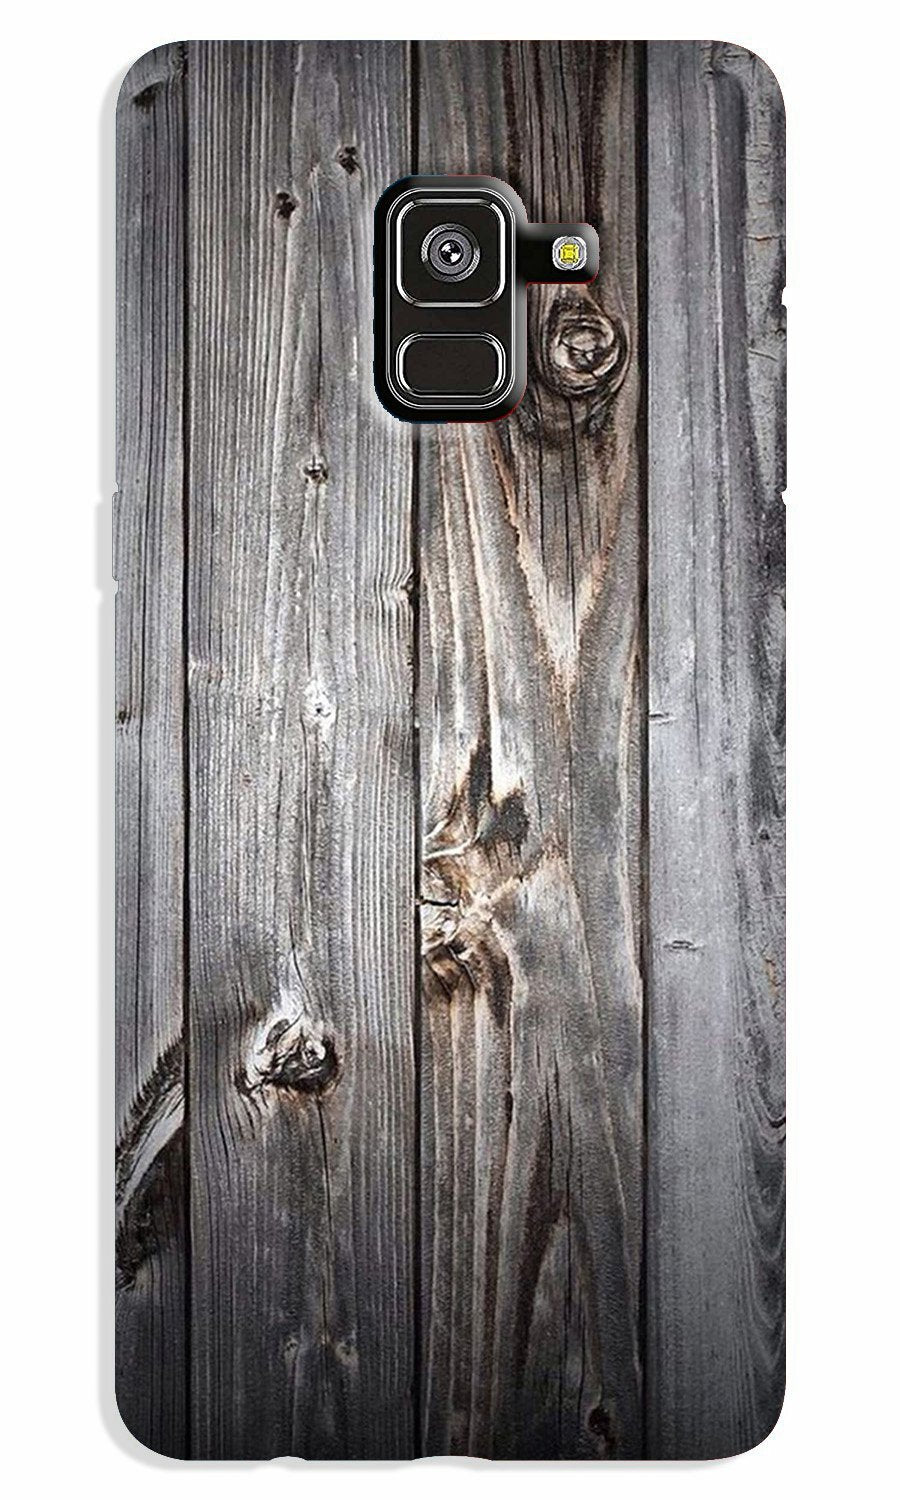 Wooden Look Case for Galaxy A8 Plus(Design - 114)